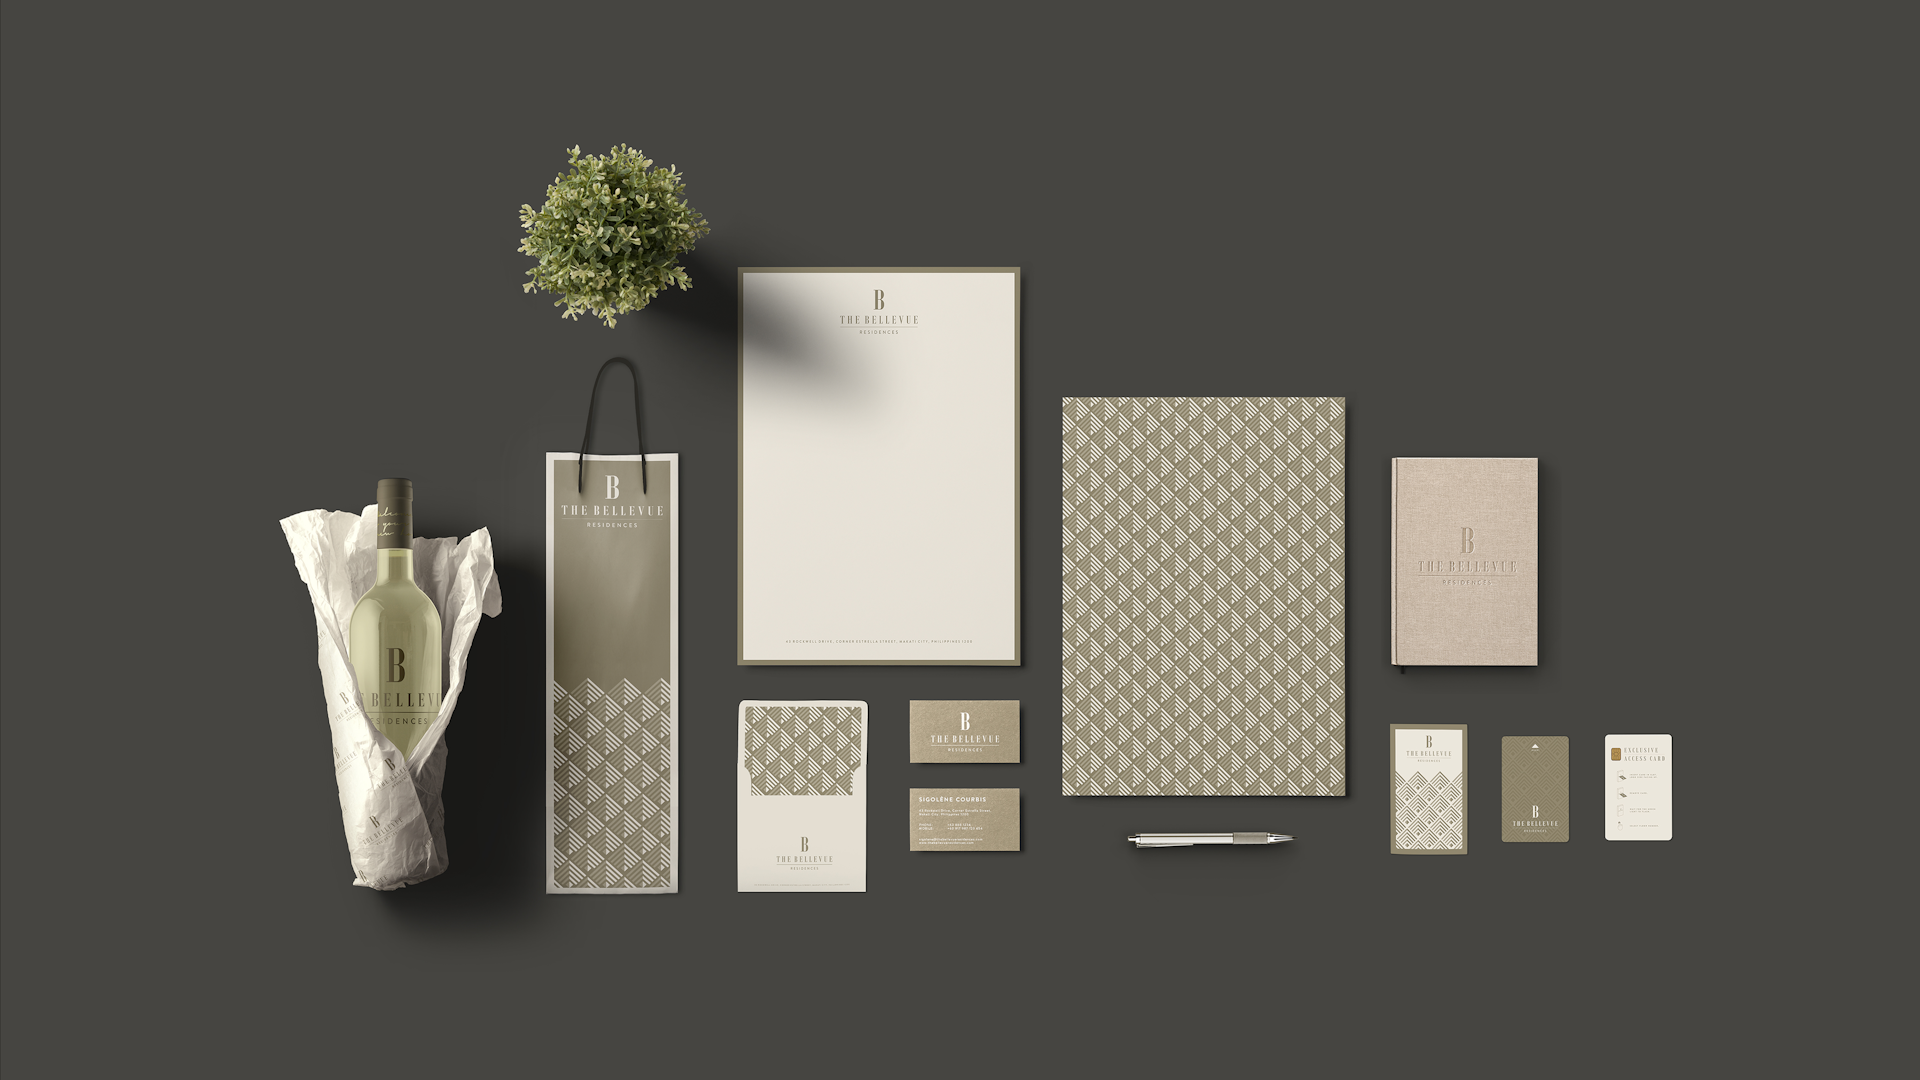 The Bellevue residences Branding Project by Fishfinger Design Agency